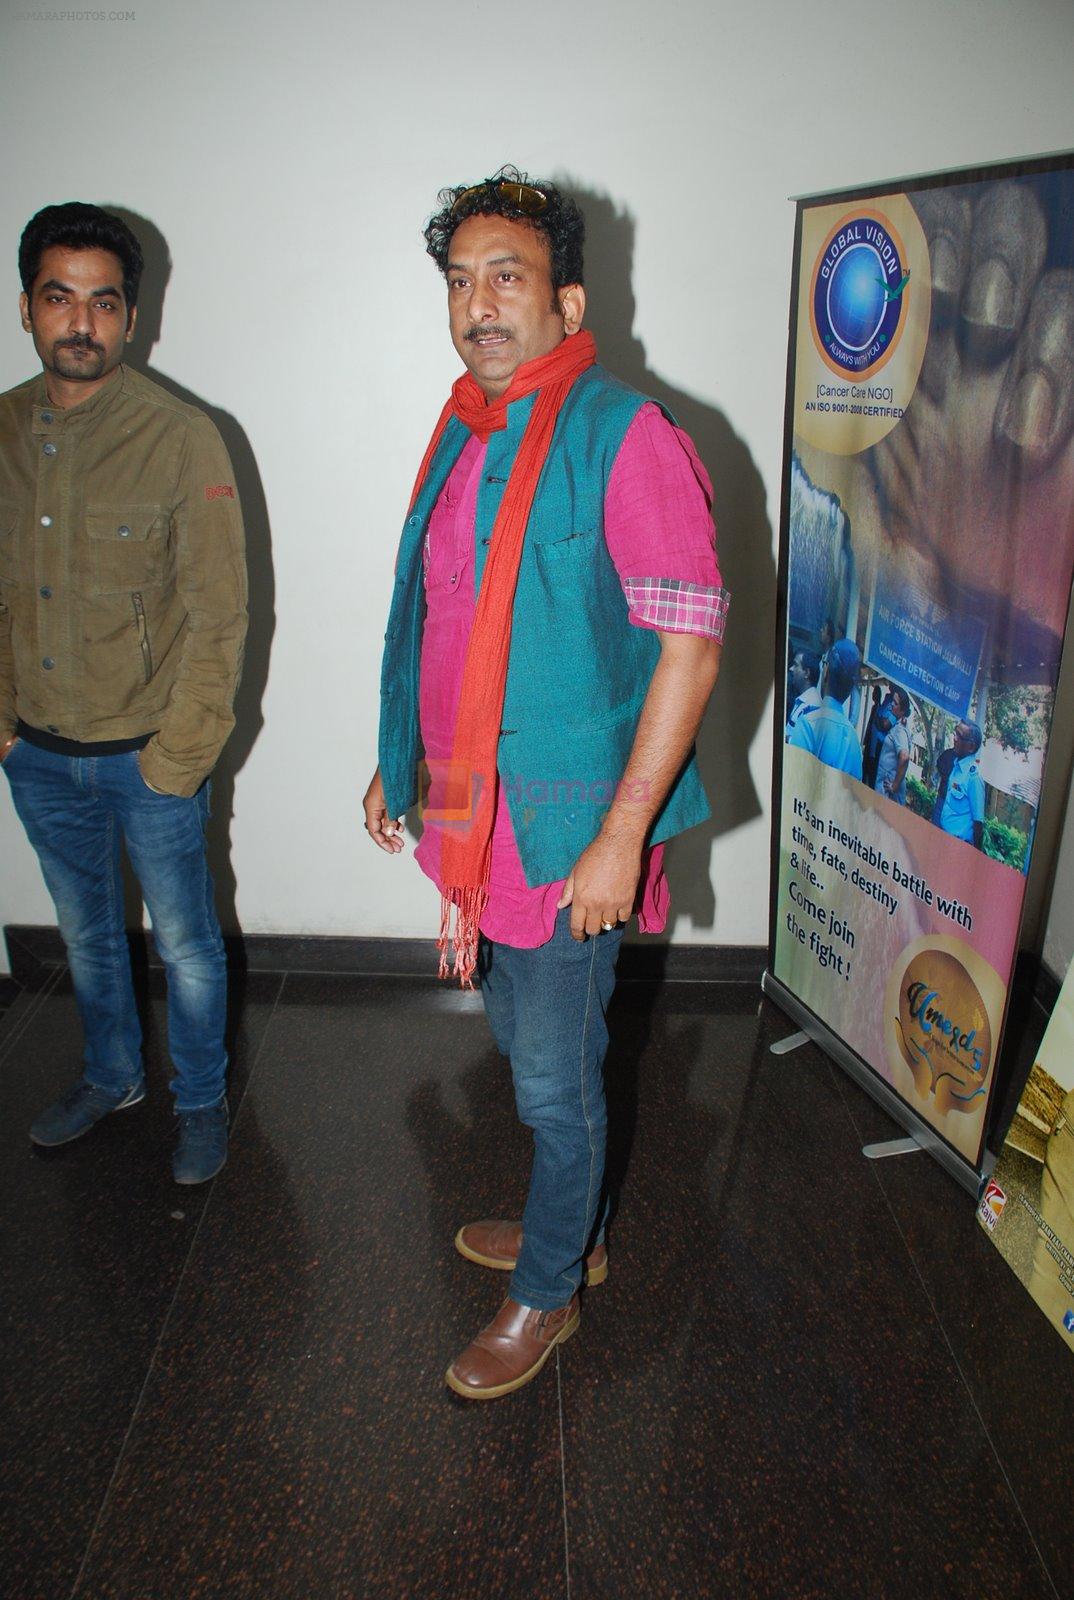 Hemant Pandey at Hey bro promotional event in Thane, Mumbai on 17th Jan 2015